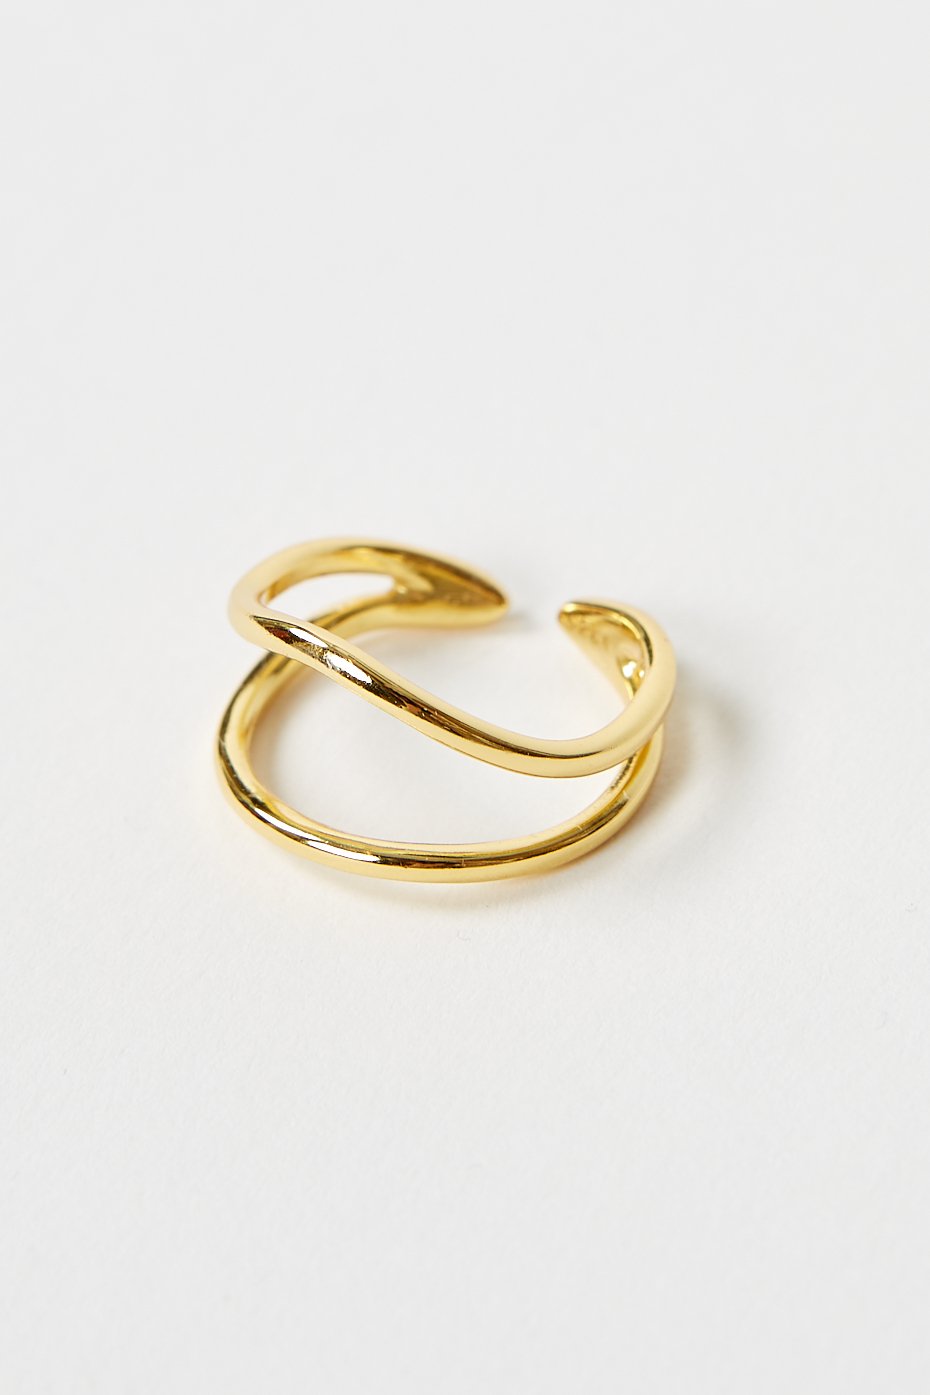 Formation Gold Wave Ring